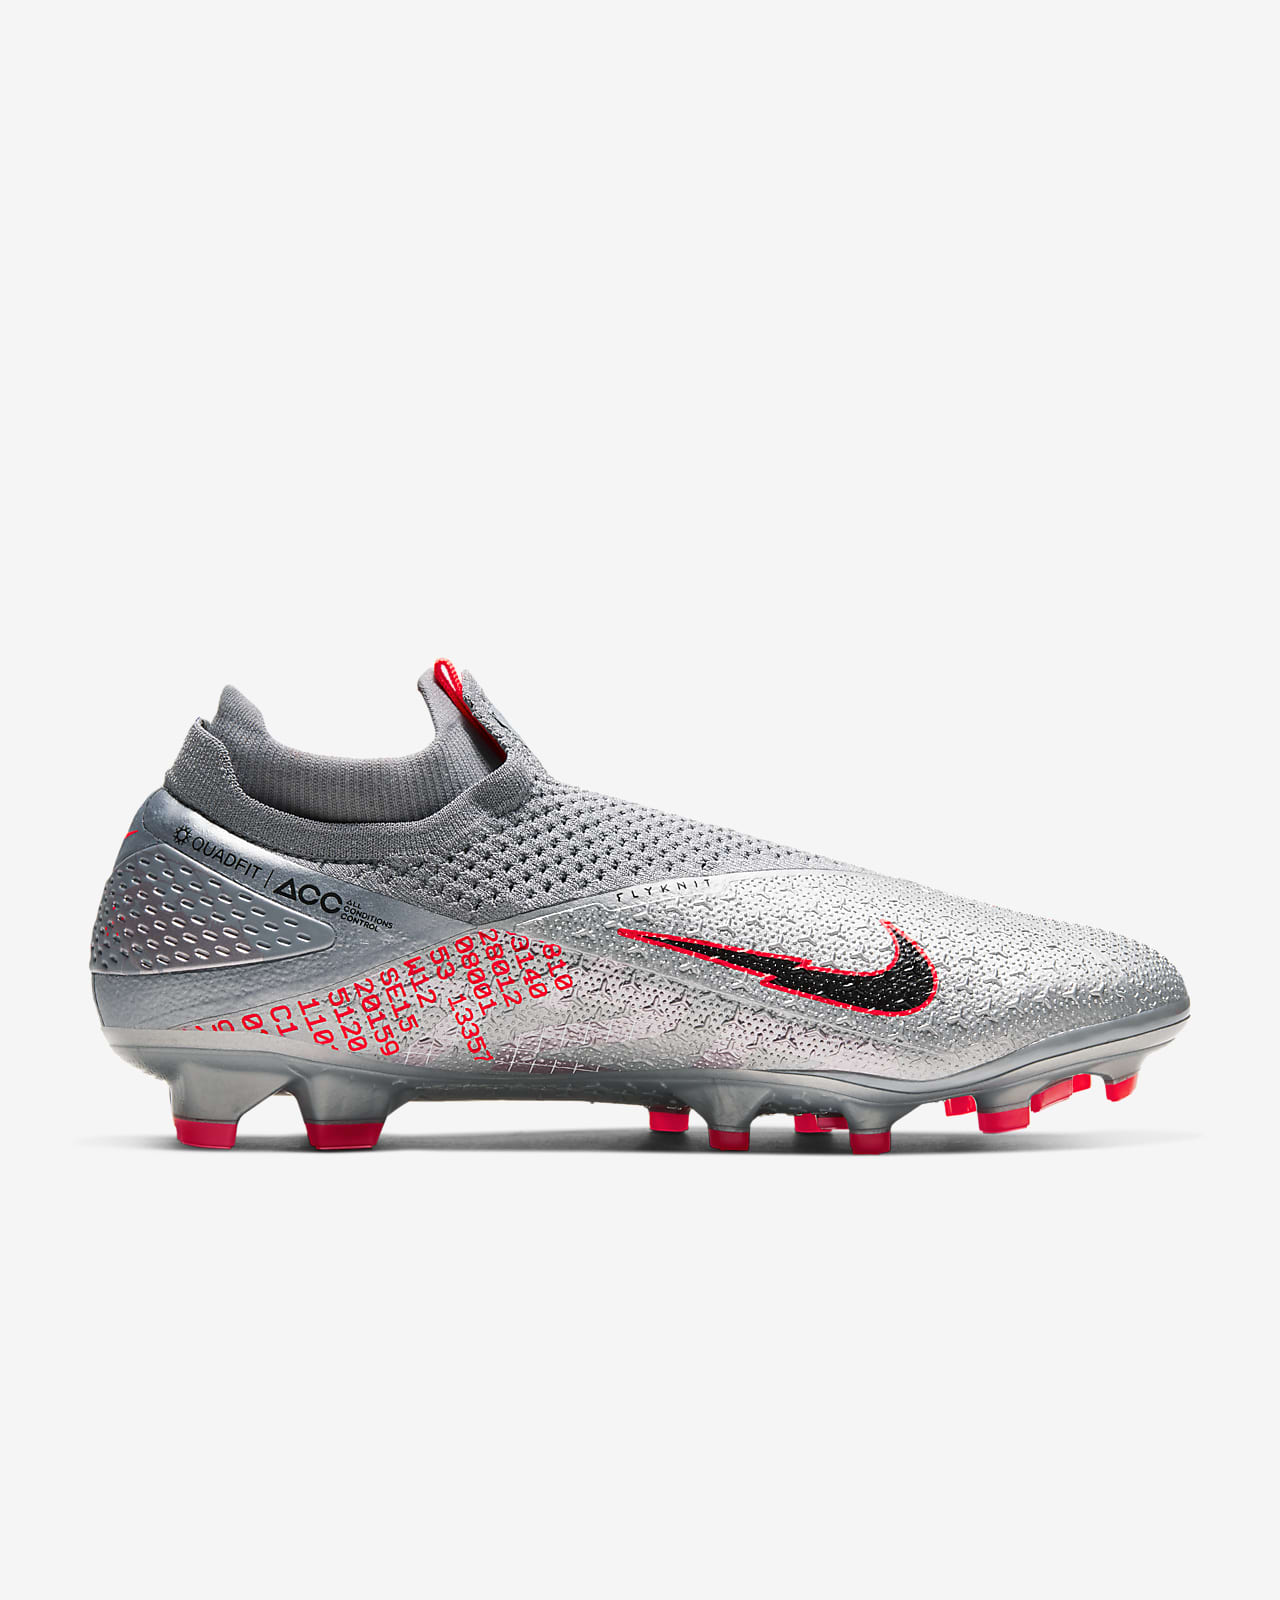 nike dynamic fit football boots